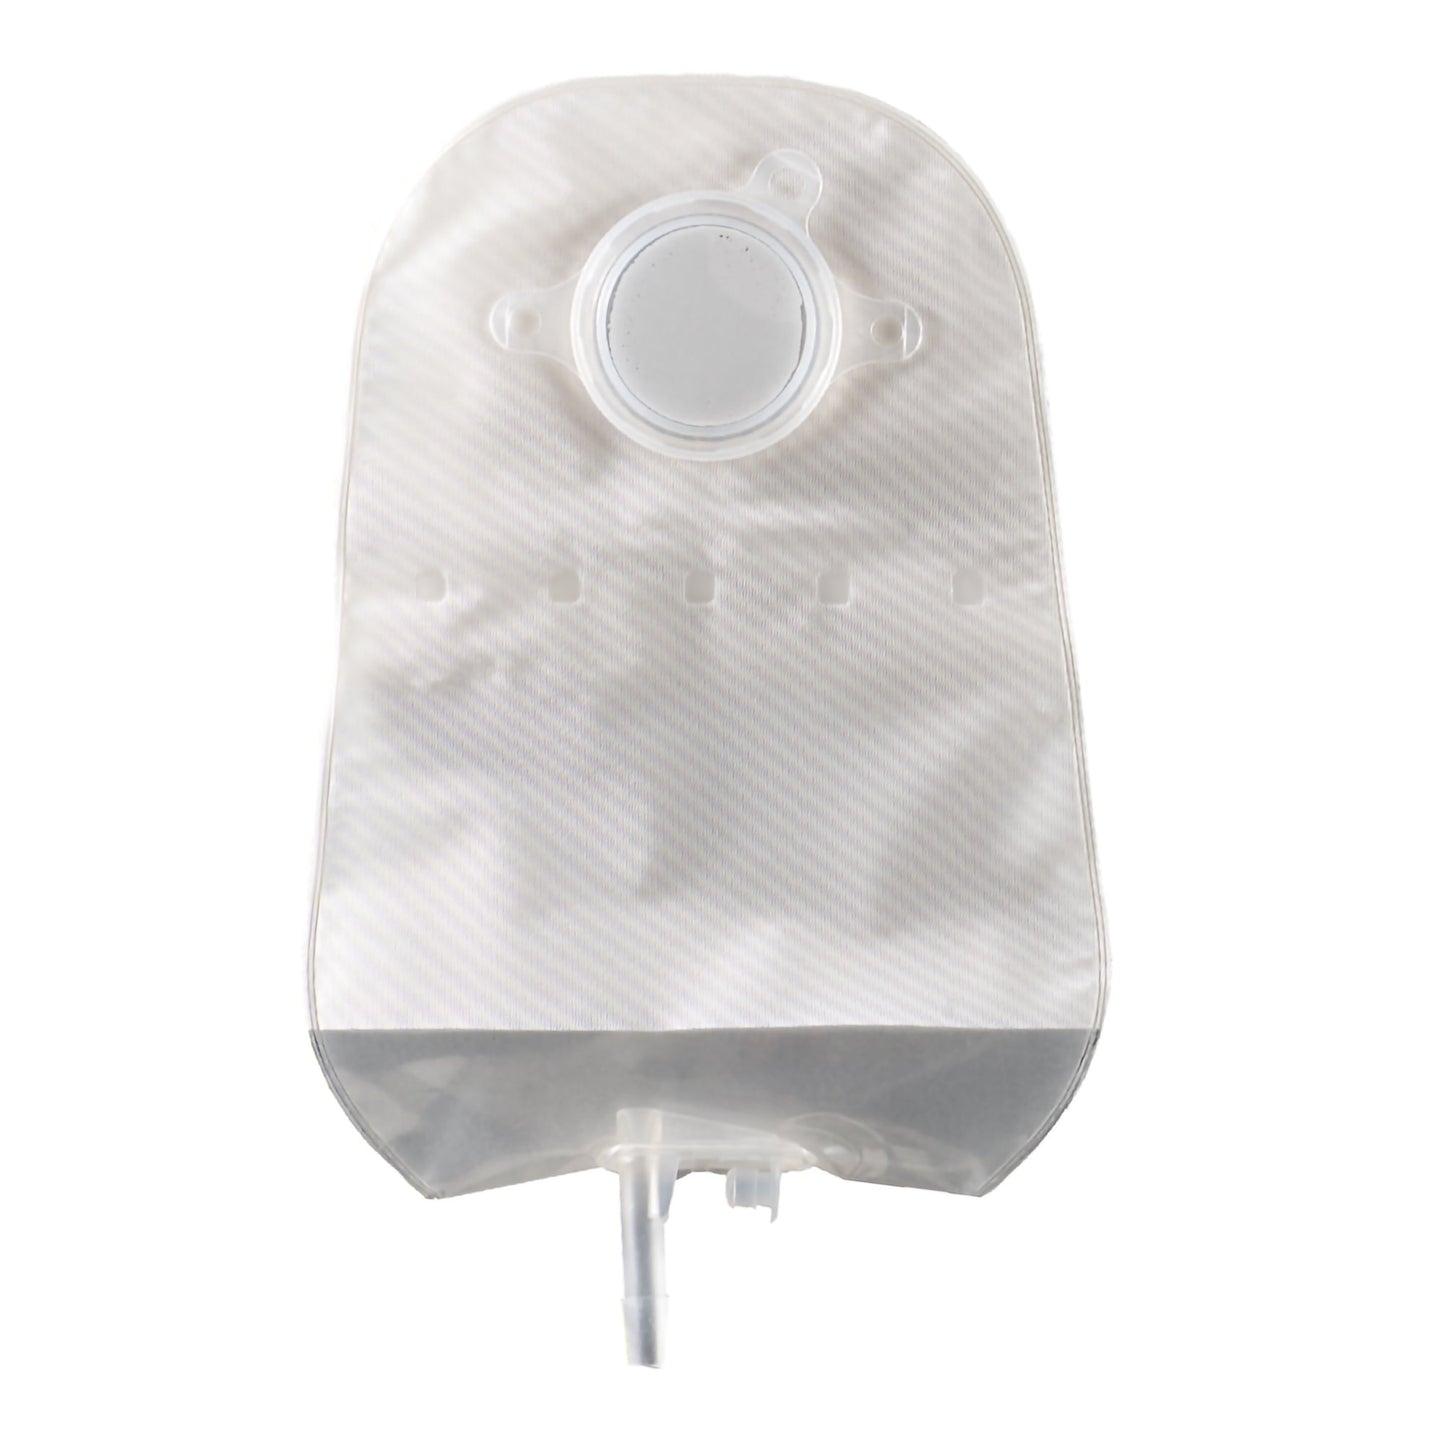 Sur-Fit Natura® Two-Piece Drainable Transparent Urostomy Pouch, 10 Inch Length, 2.75 Inch Flange, 10 ct